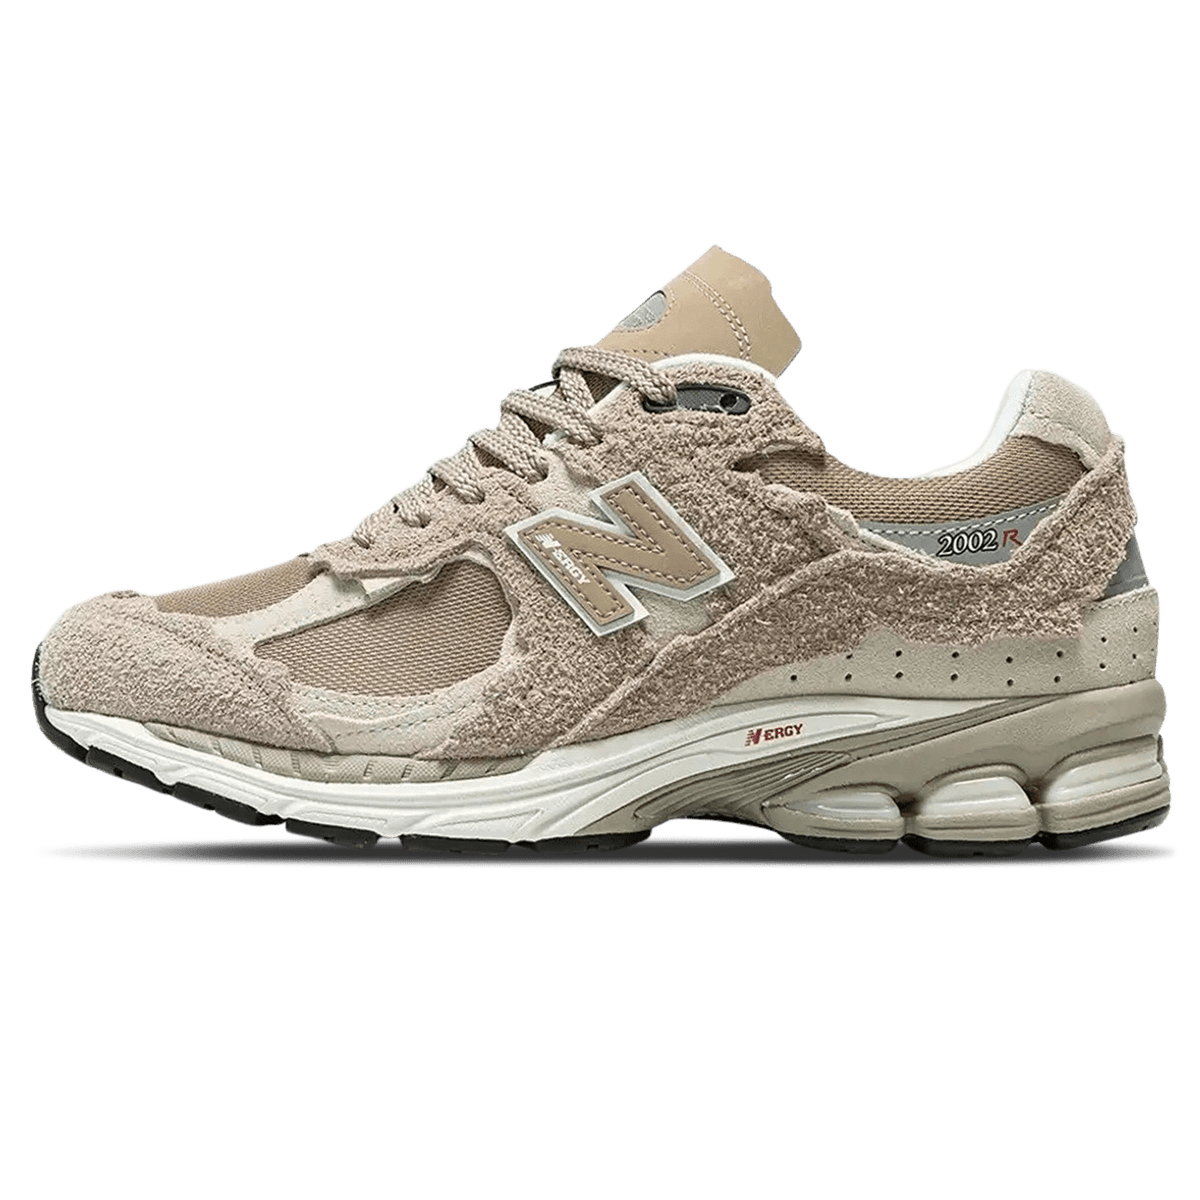 New Balance Caracter 2002R 'Protection Pack - Driftwood' - JuzsportsShops